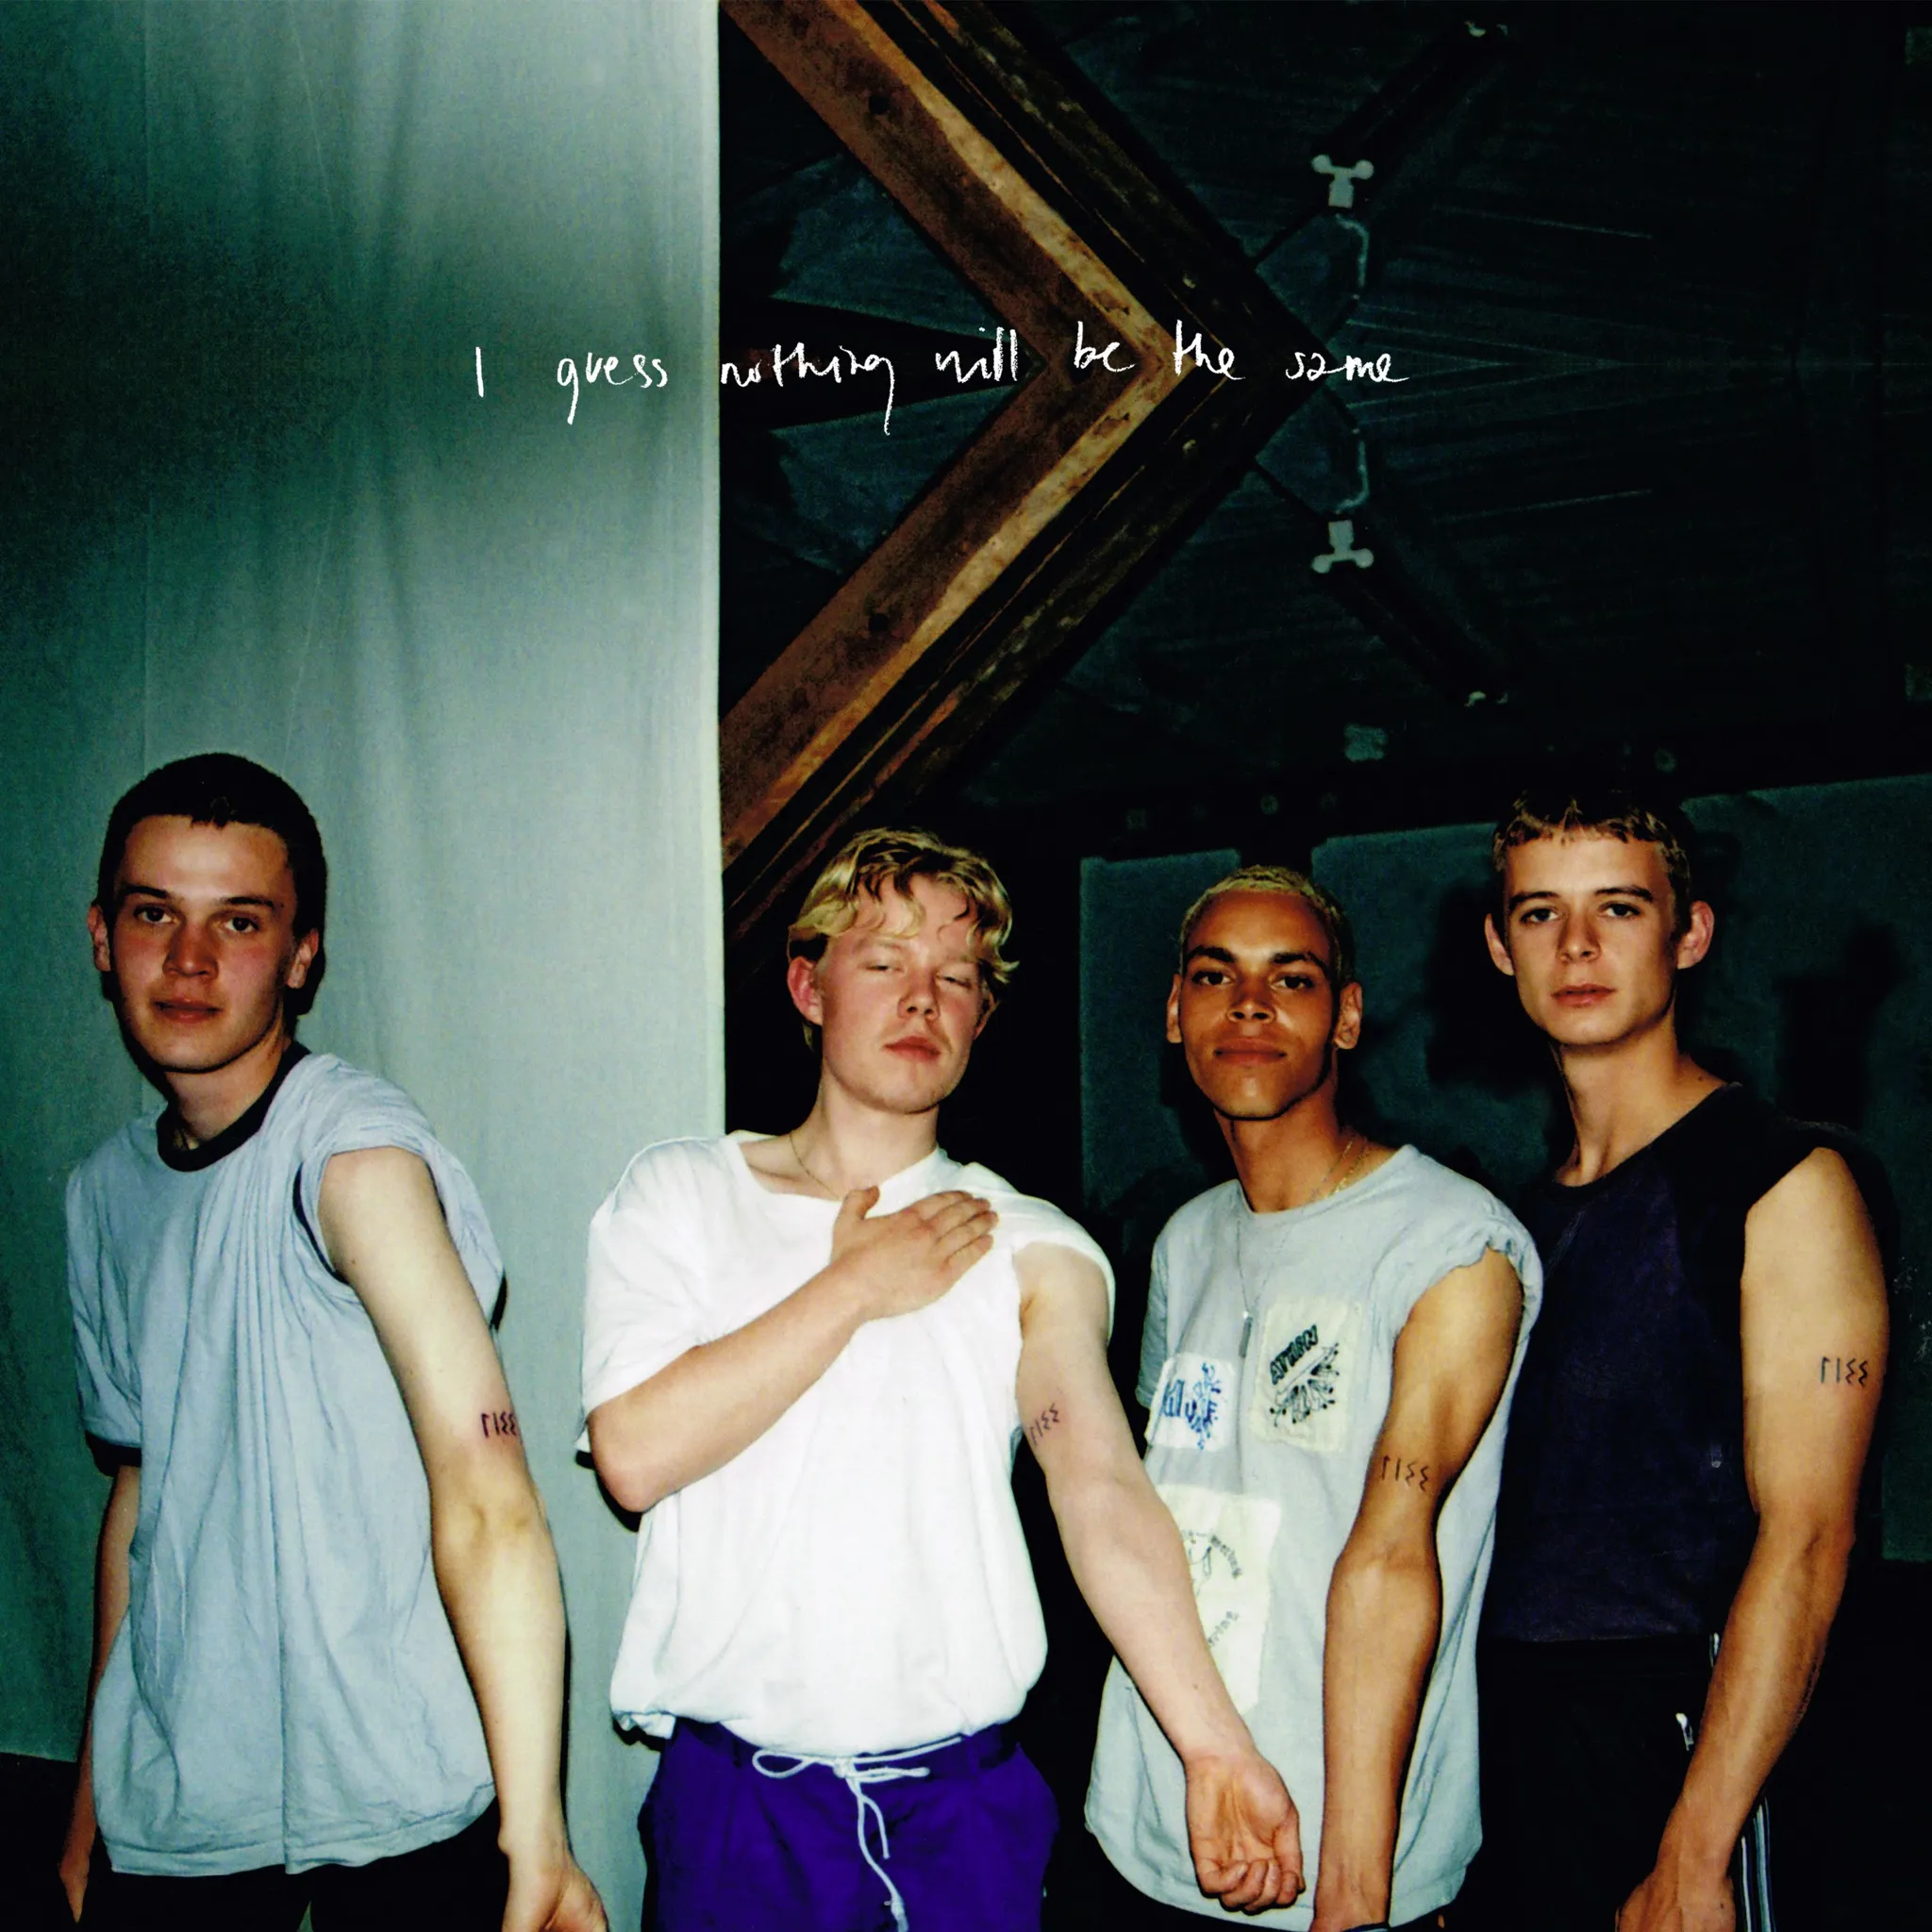 <strong>Liss - I Guess Nothing Will be the Same</strong> (Vinyl LP - blue)